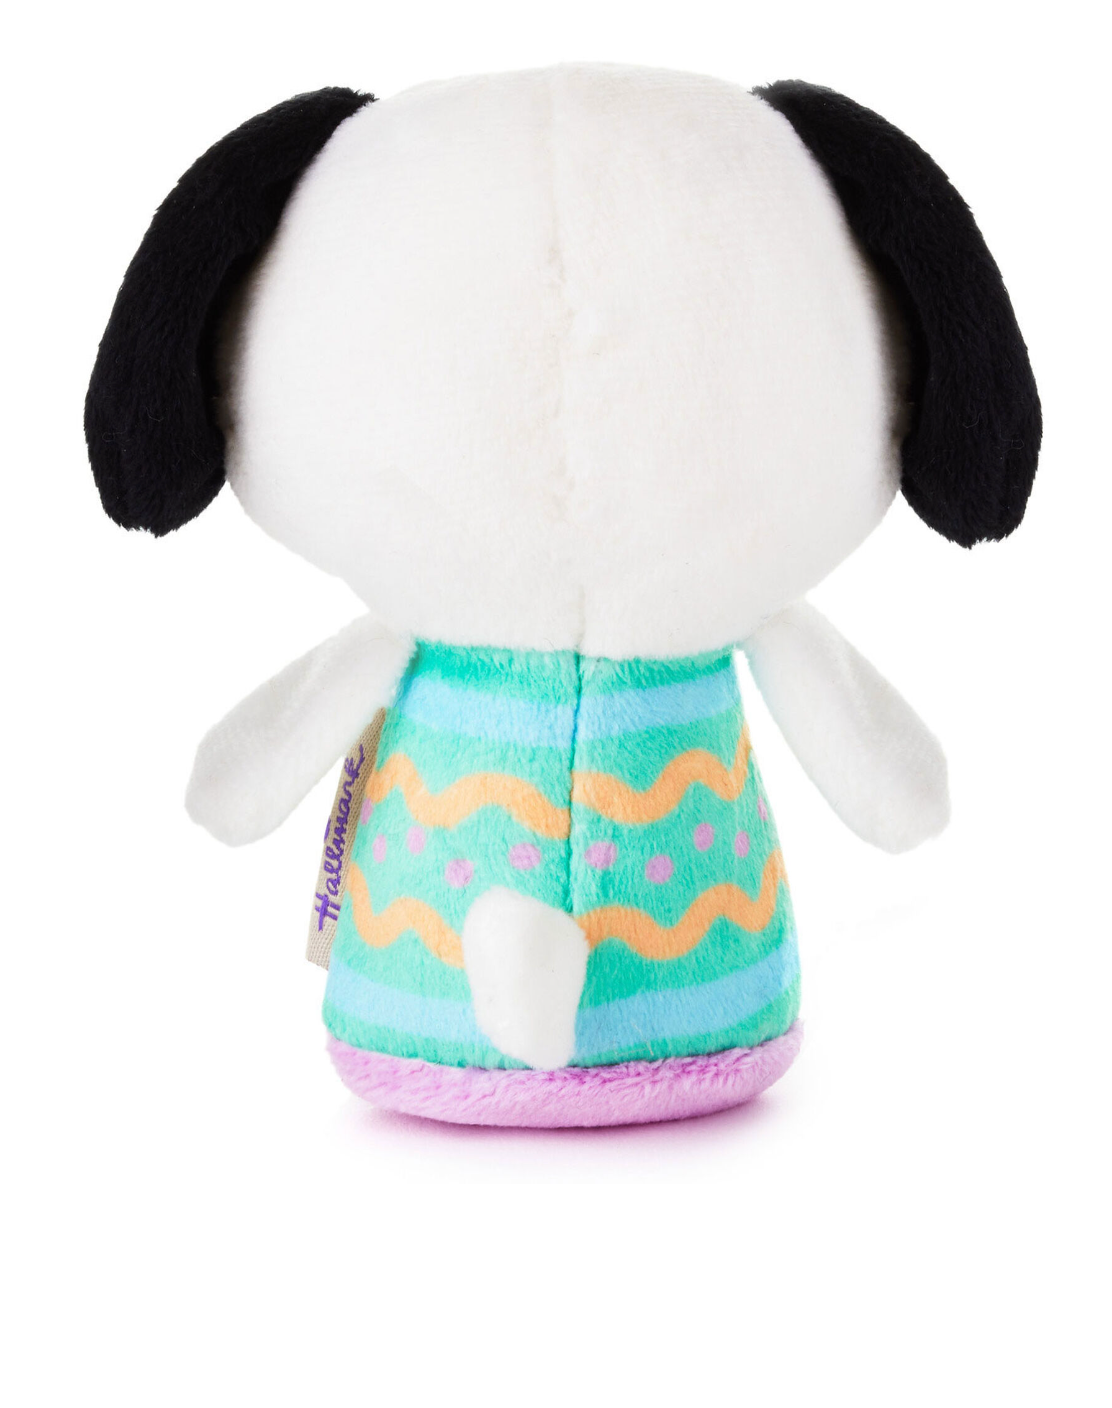 Hallmark Itty Bittys Peanuts Easter Egg Snoopy Plush New with Tag